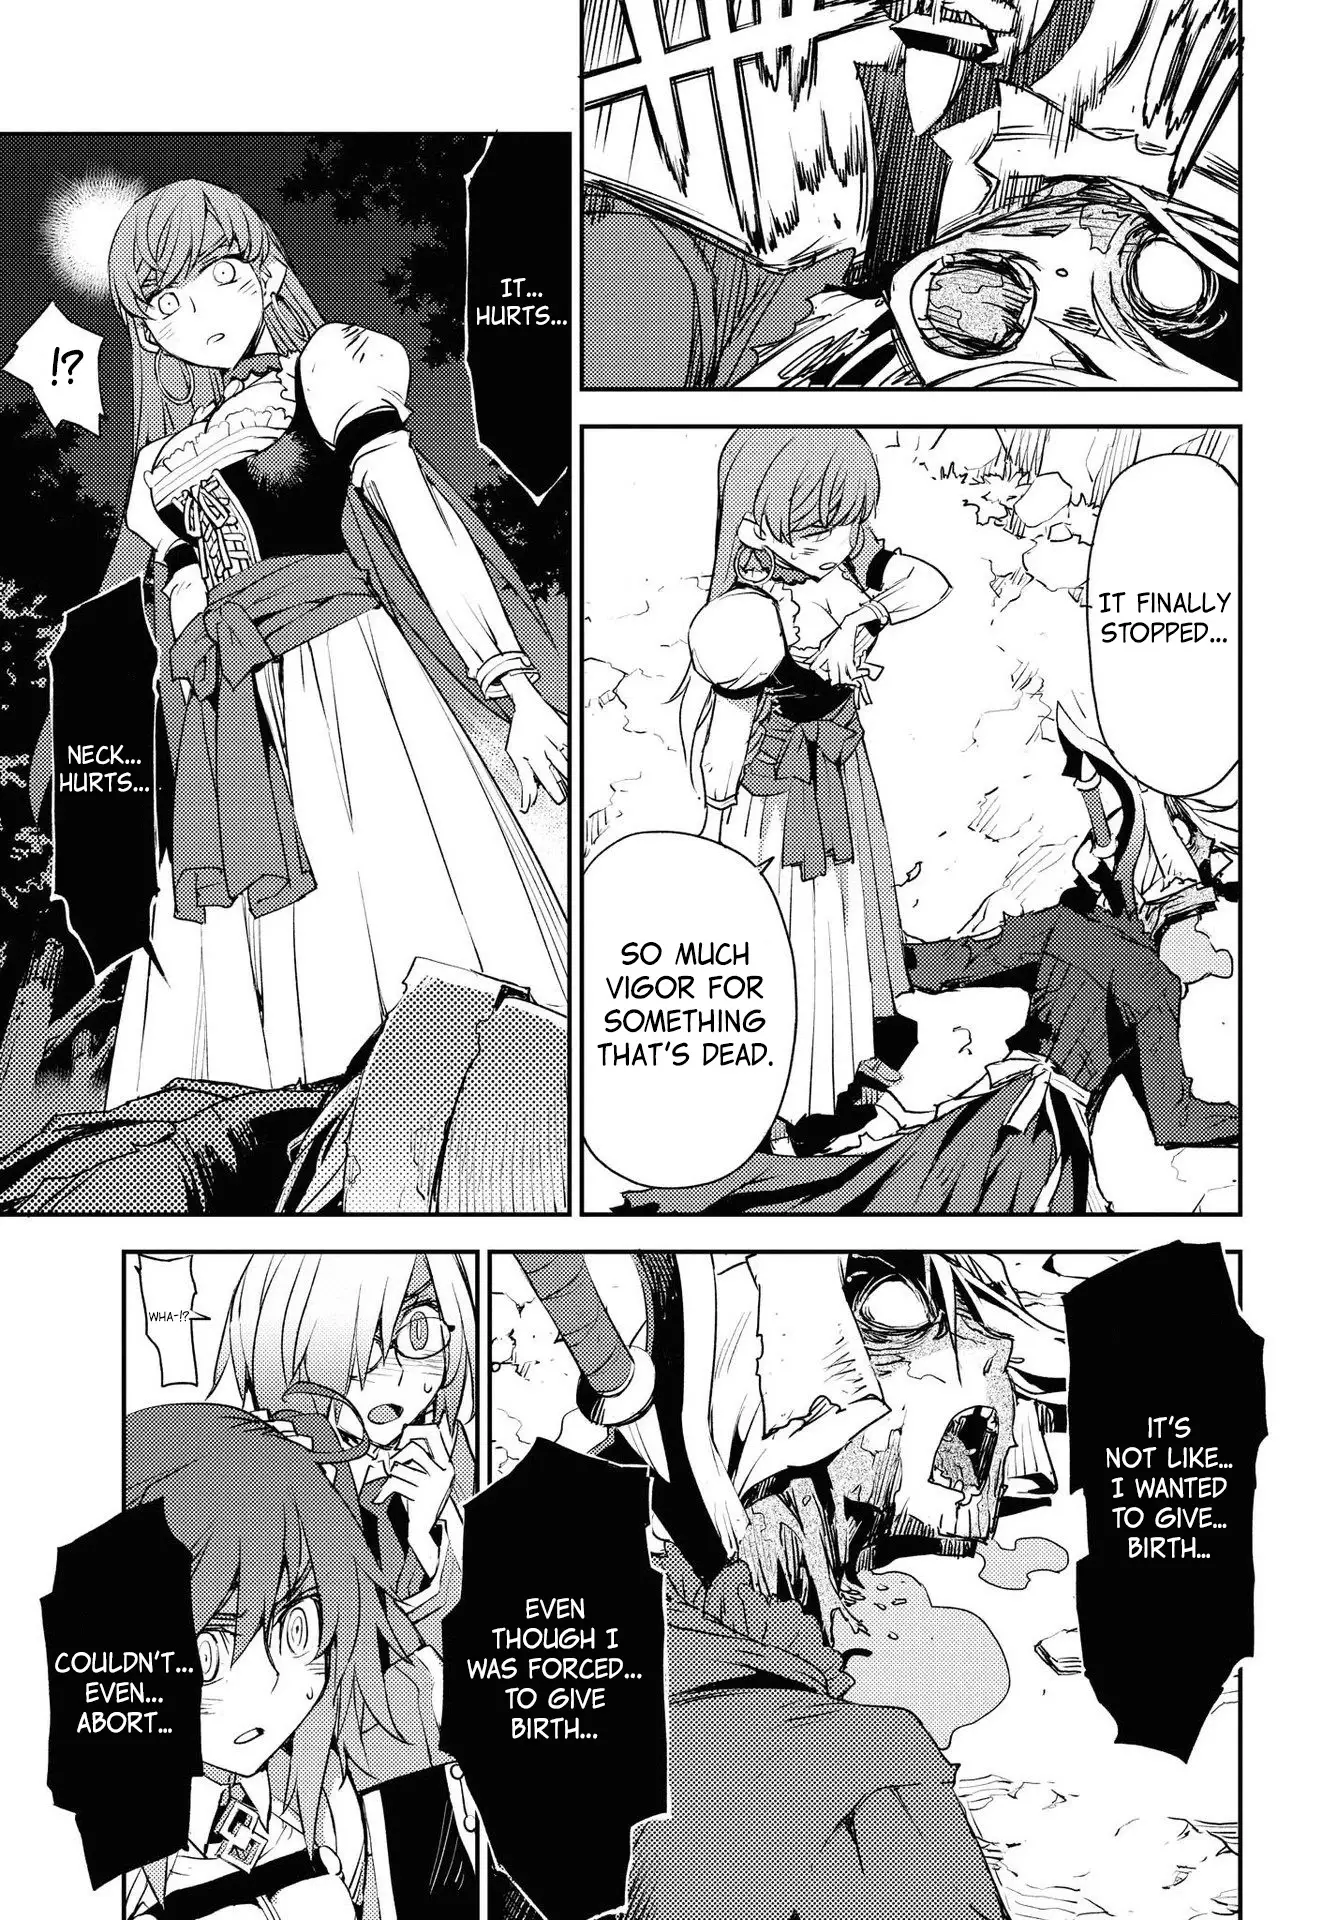 Fate/grand Order: Epic Of Remnant - Subspecies Singularity Iv: Taboo Advent Salem: Salem Of Heresy - 16 page 17